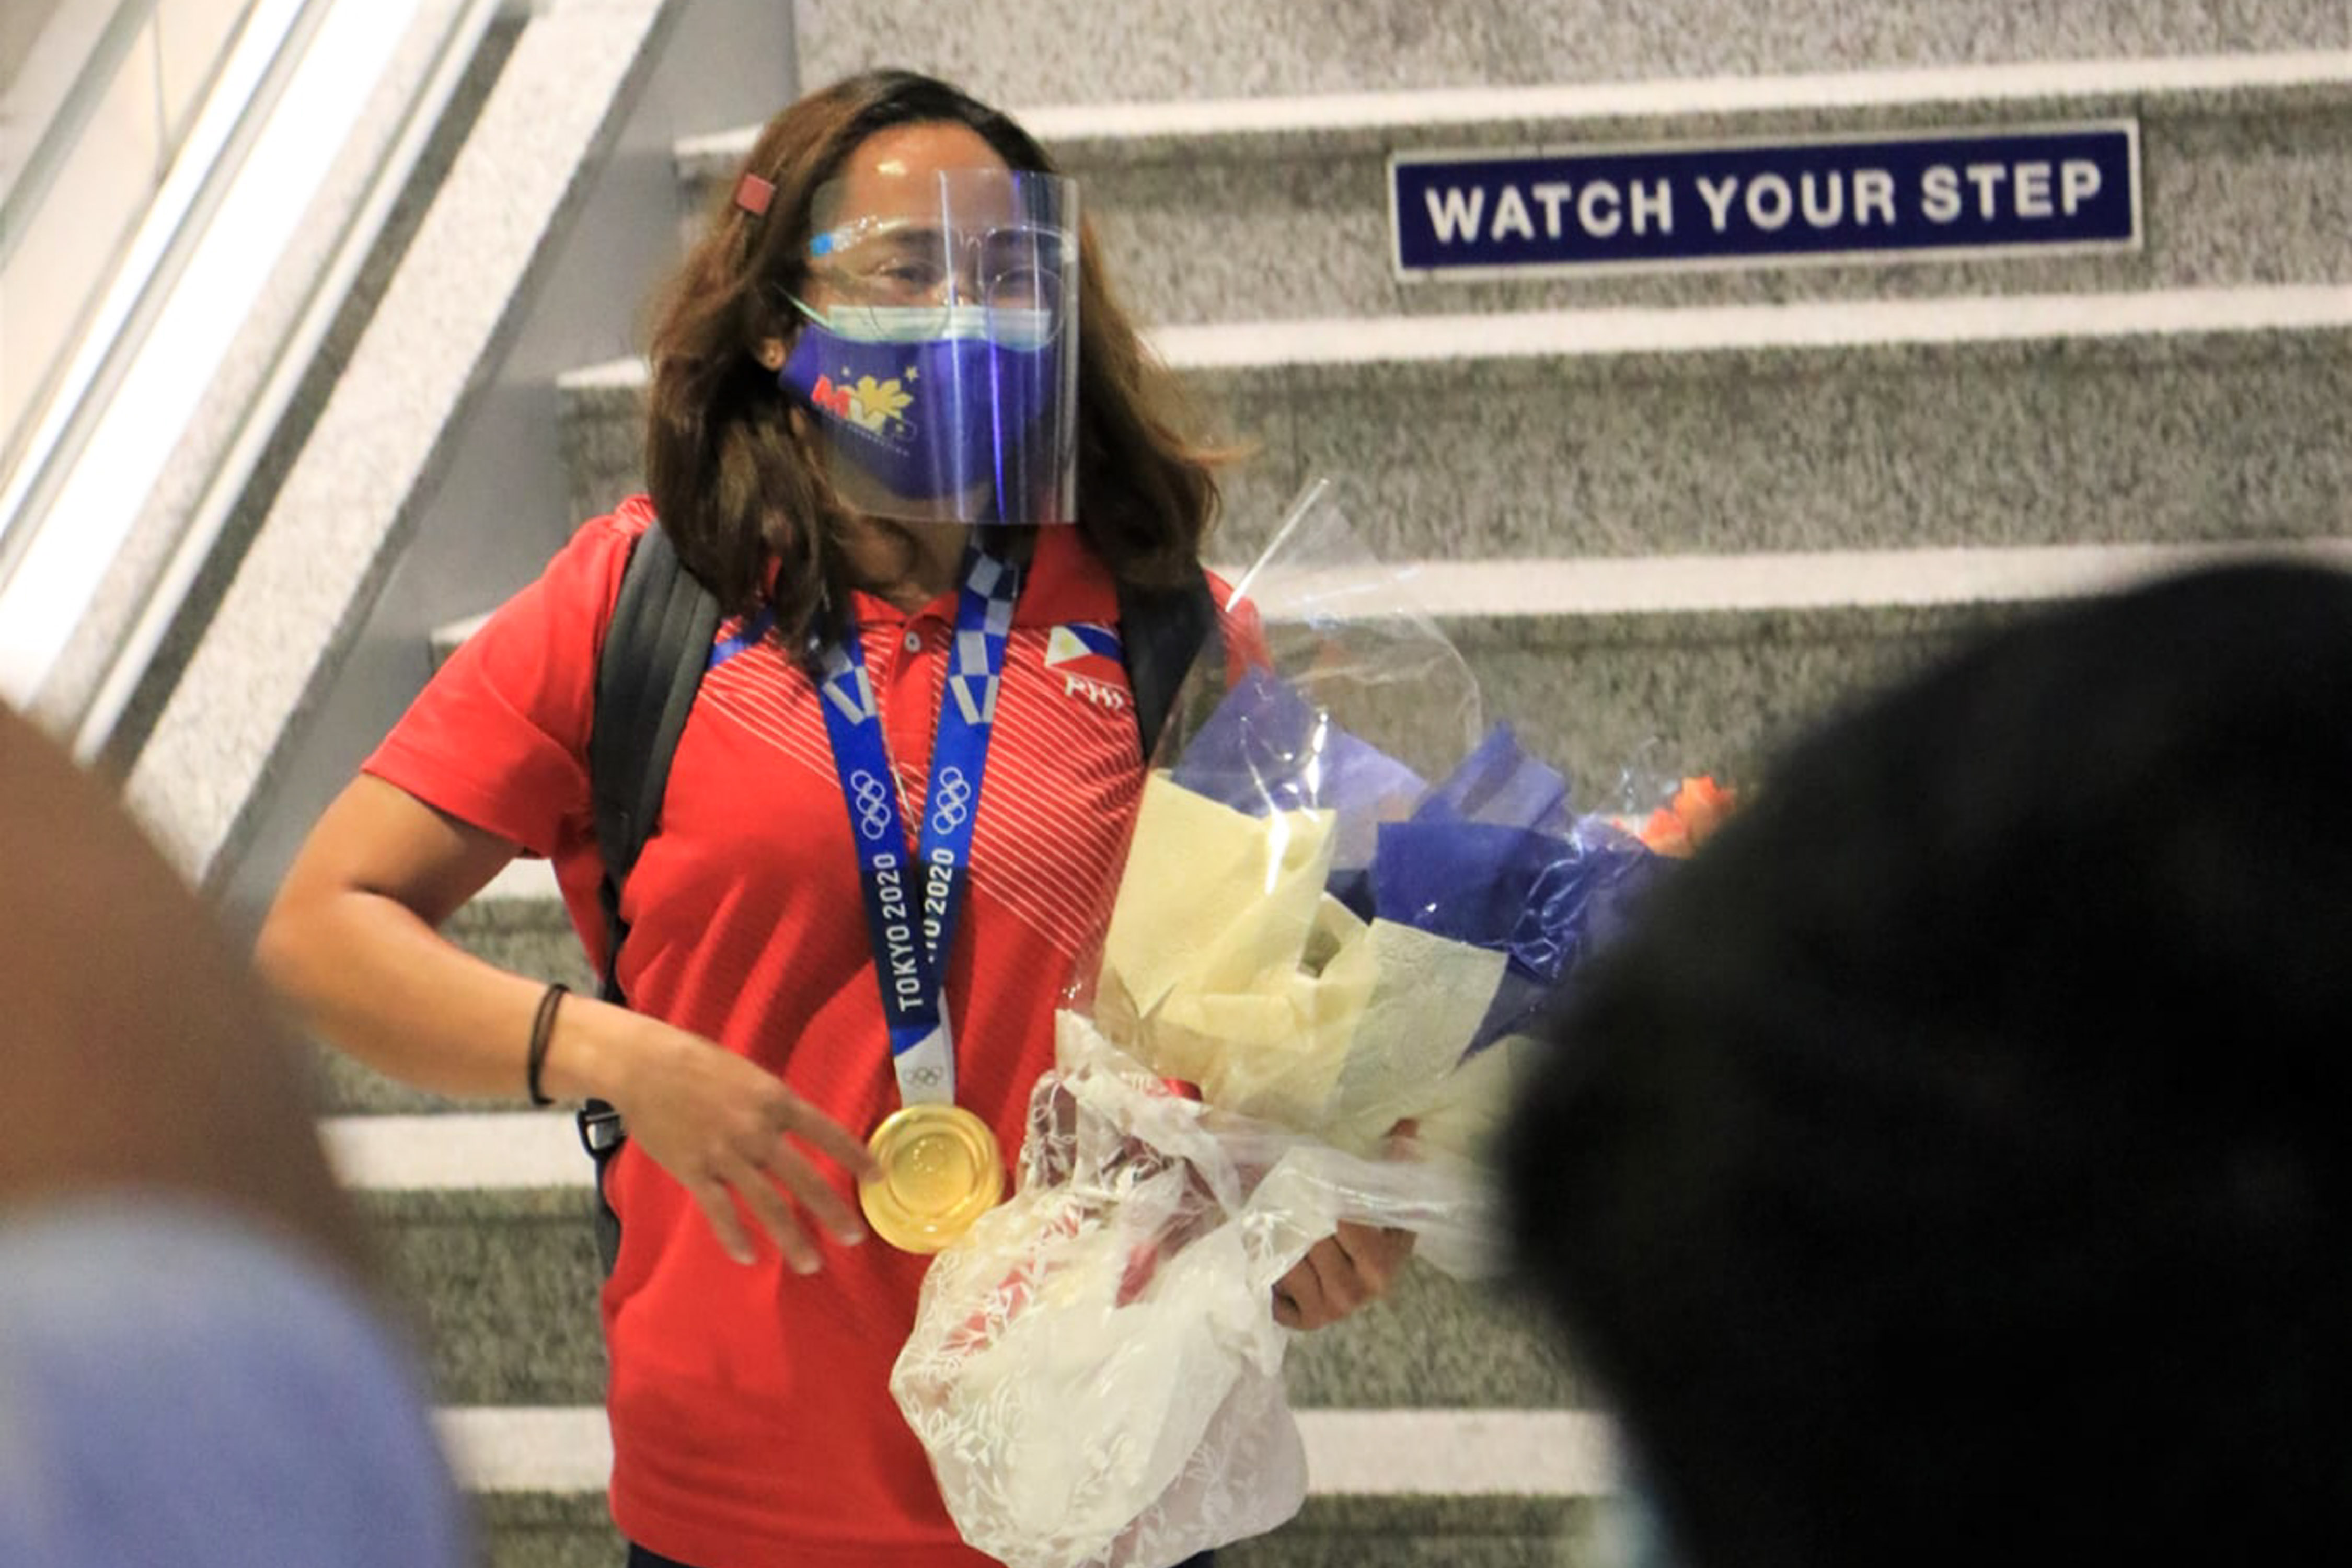 Olympic champ Hidilyn Diaz returns home with gold medal 1